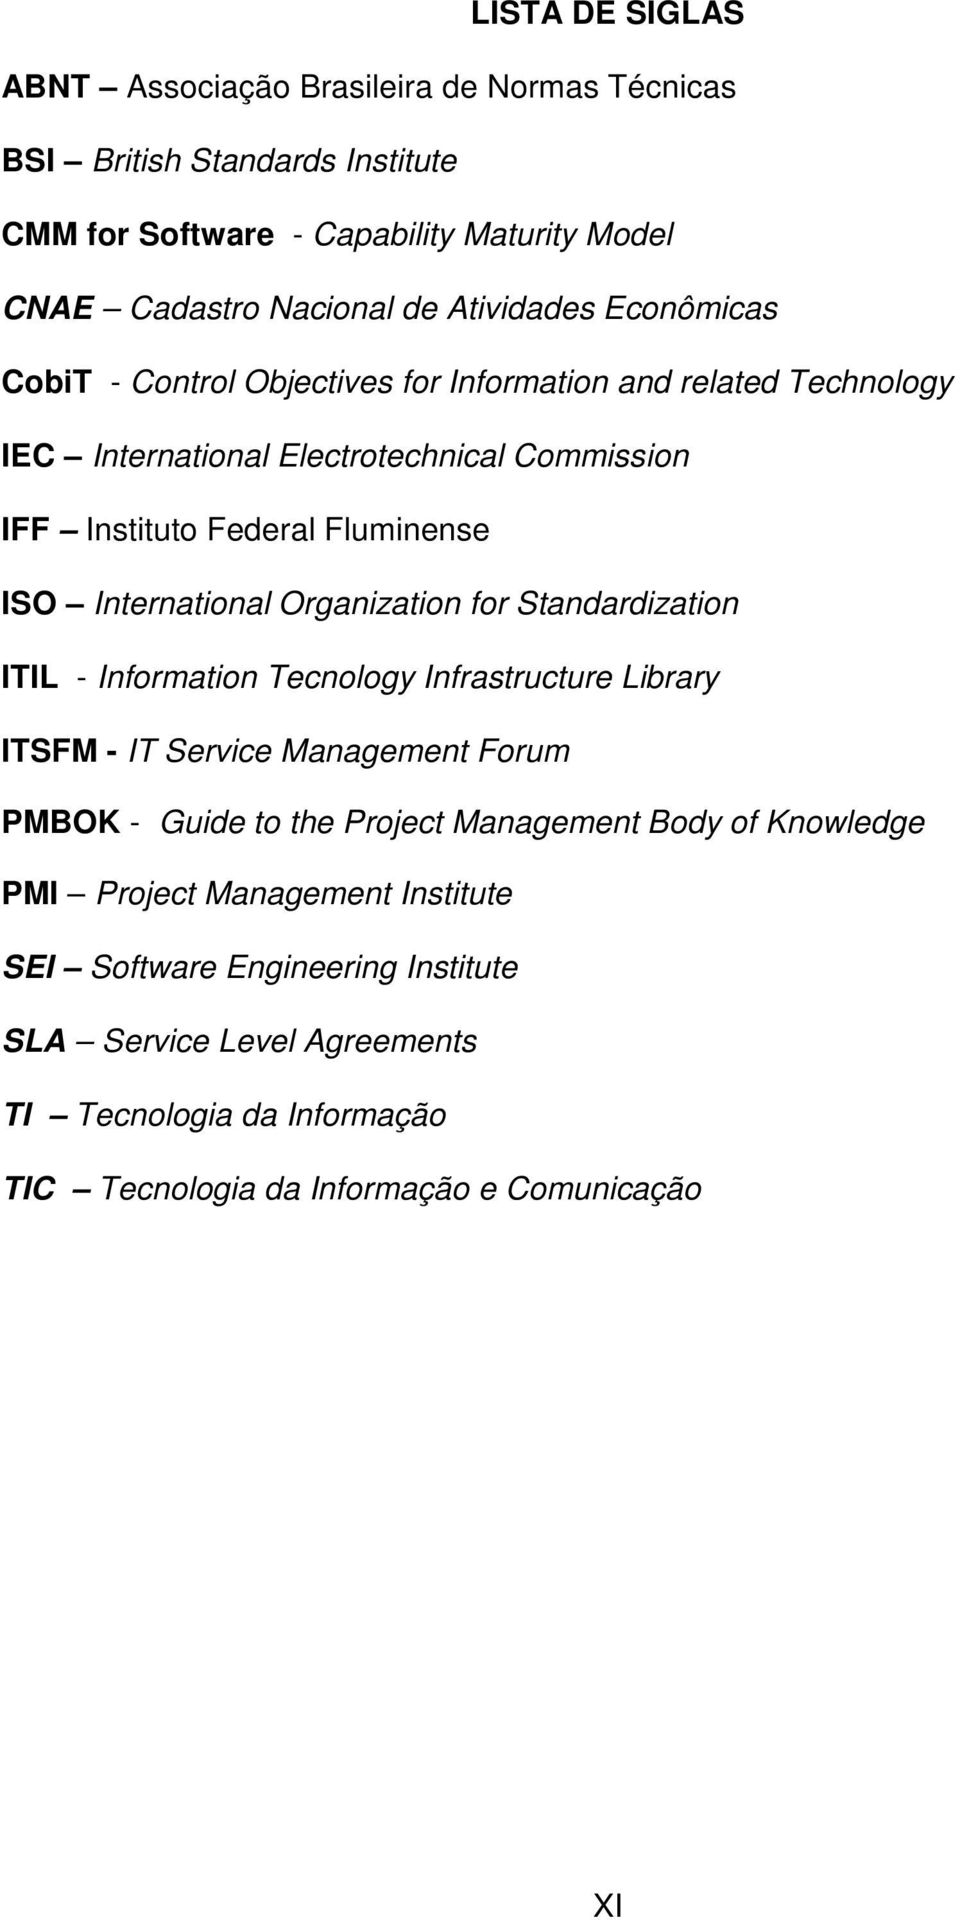 International Organization for Standardization ITIL - Information Tecnology Infrastructure Library ITSFM - IT Service Management Forum PMBOK - Guide to the Project Management